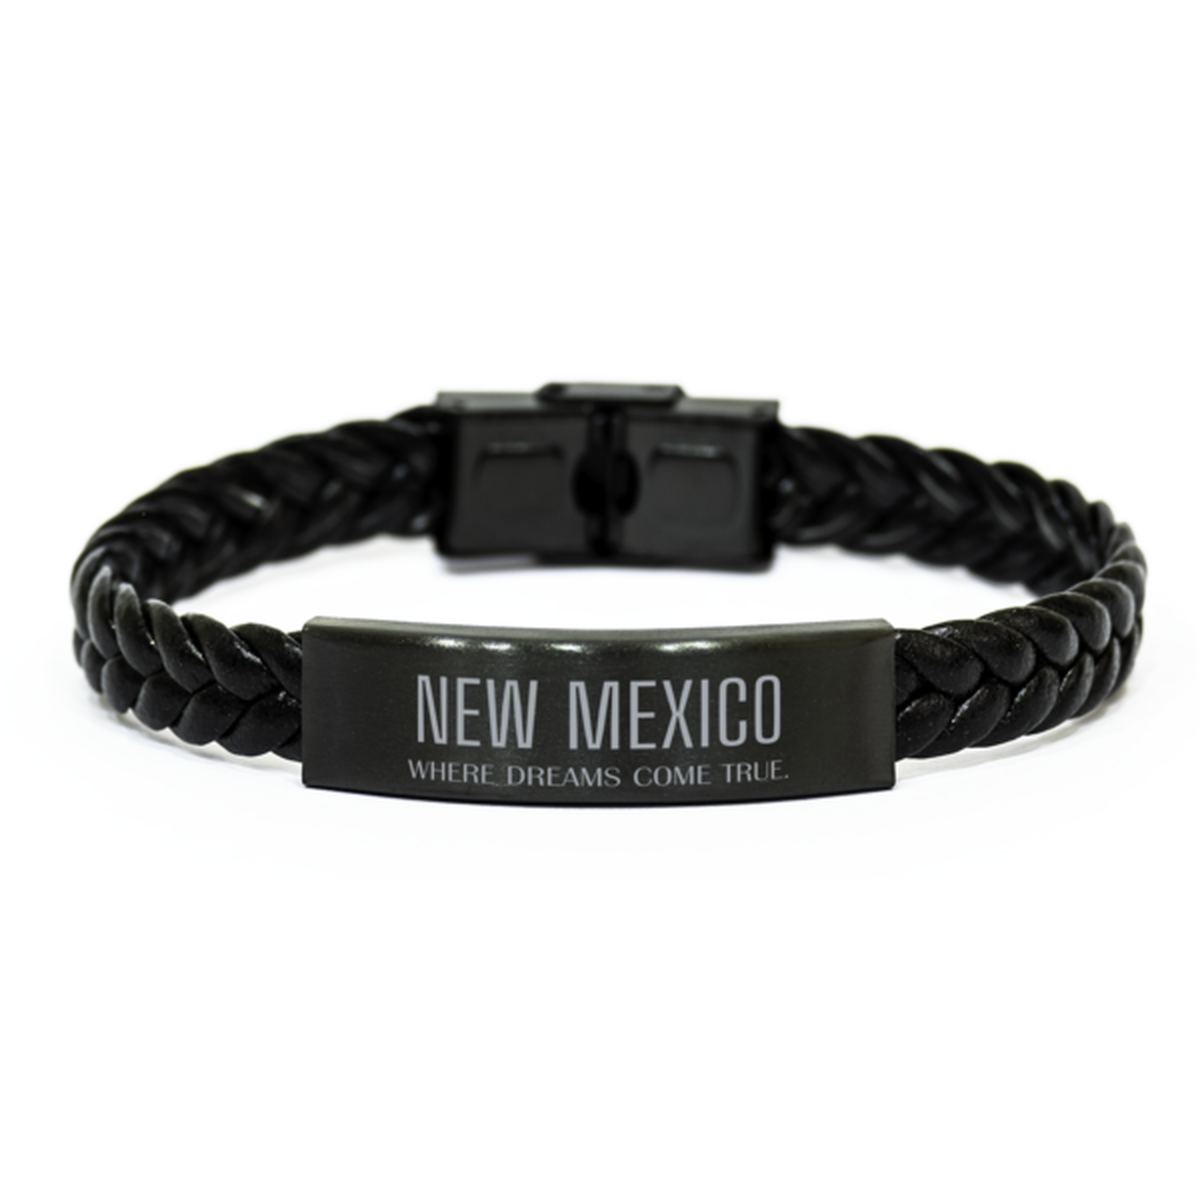 Love New Mexico State Braided Leather Bracelet, New Mexico Where dreams come true, Birthday Inspirational Gifts For New Mexico Men, Women, Friends